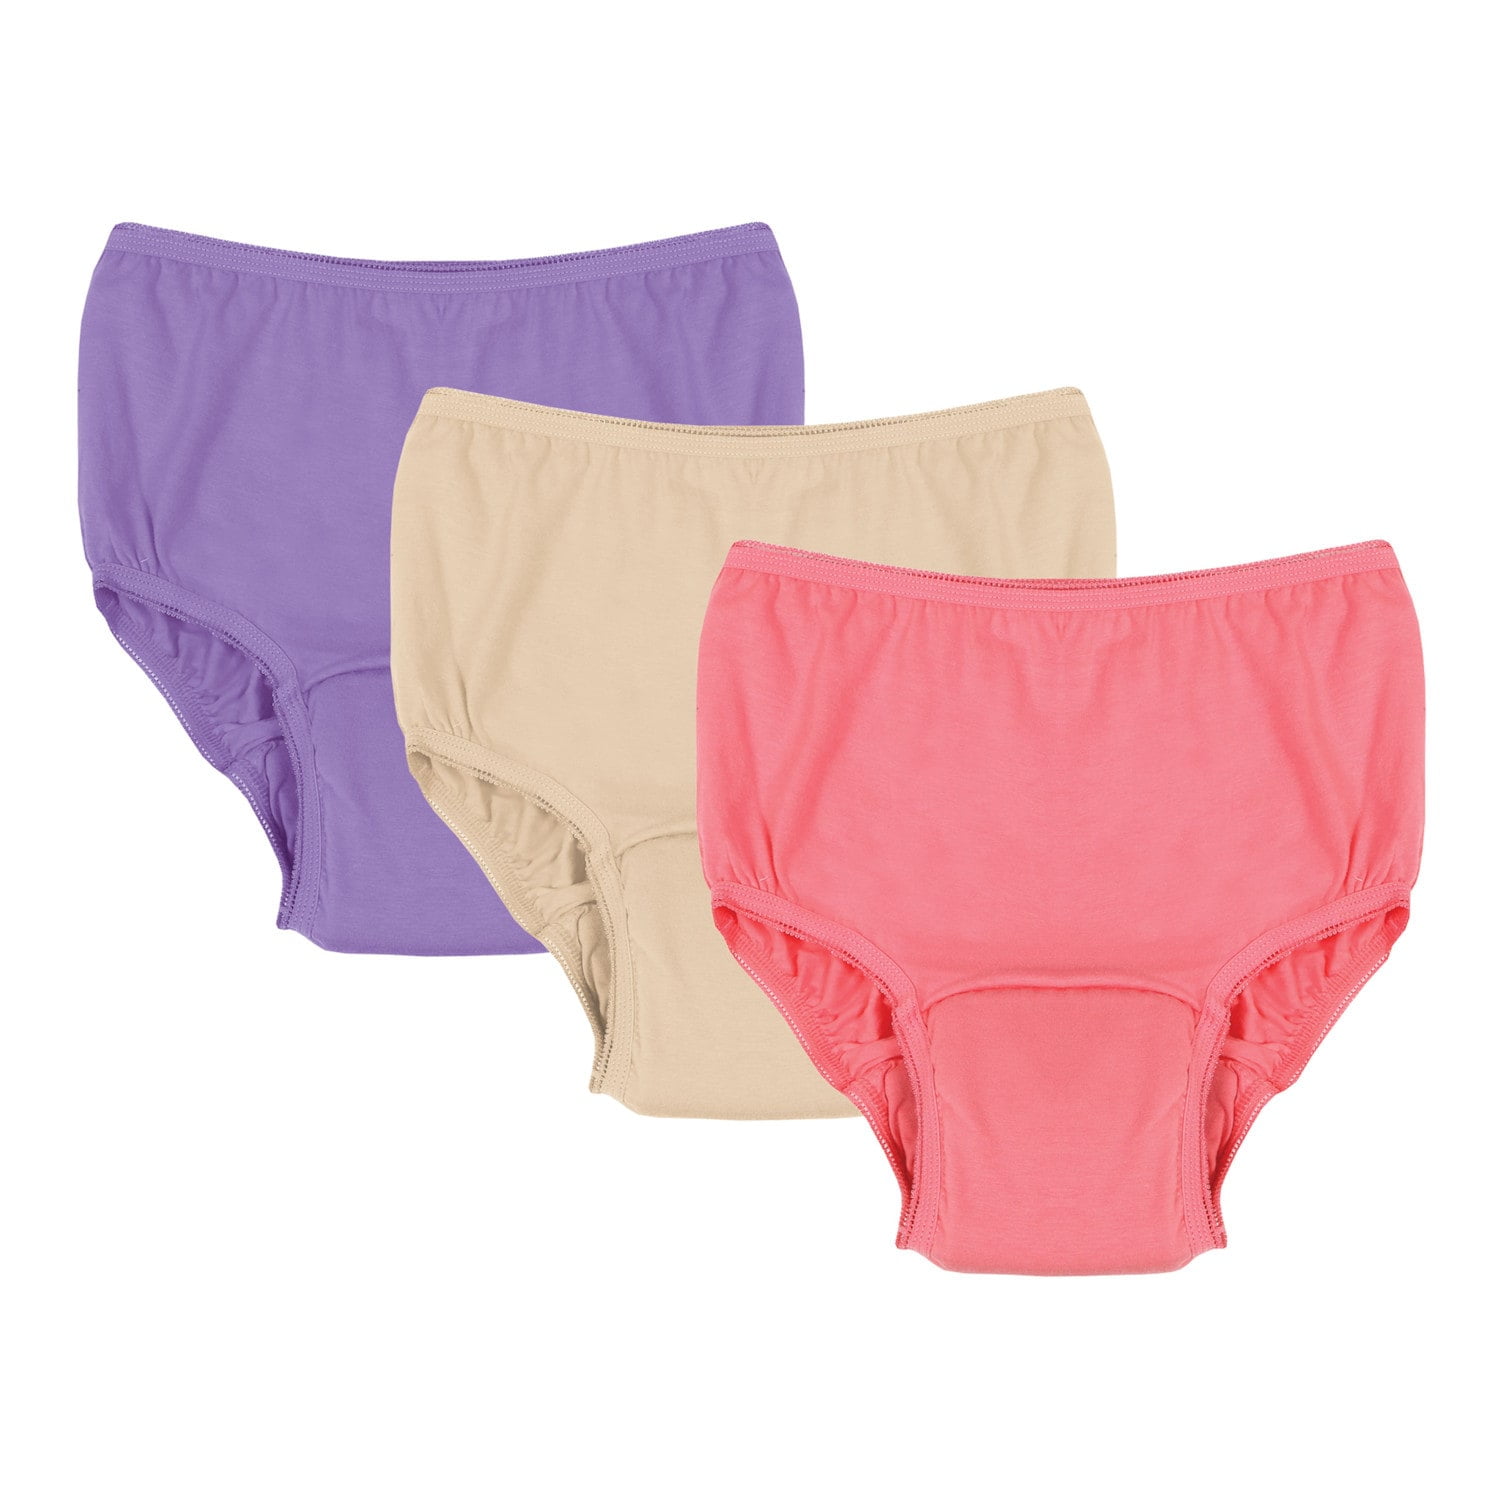 6-Pack Women's Nylon Regular Absorbency Incontinence Panties Beige Small  (Fits Hip 35-37) 